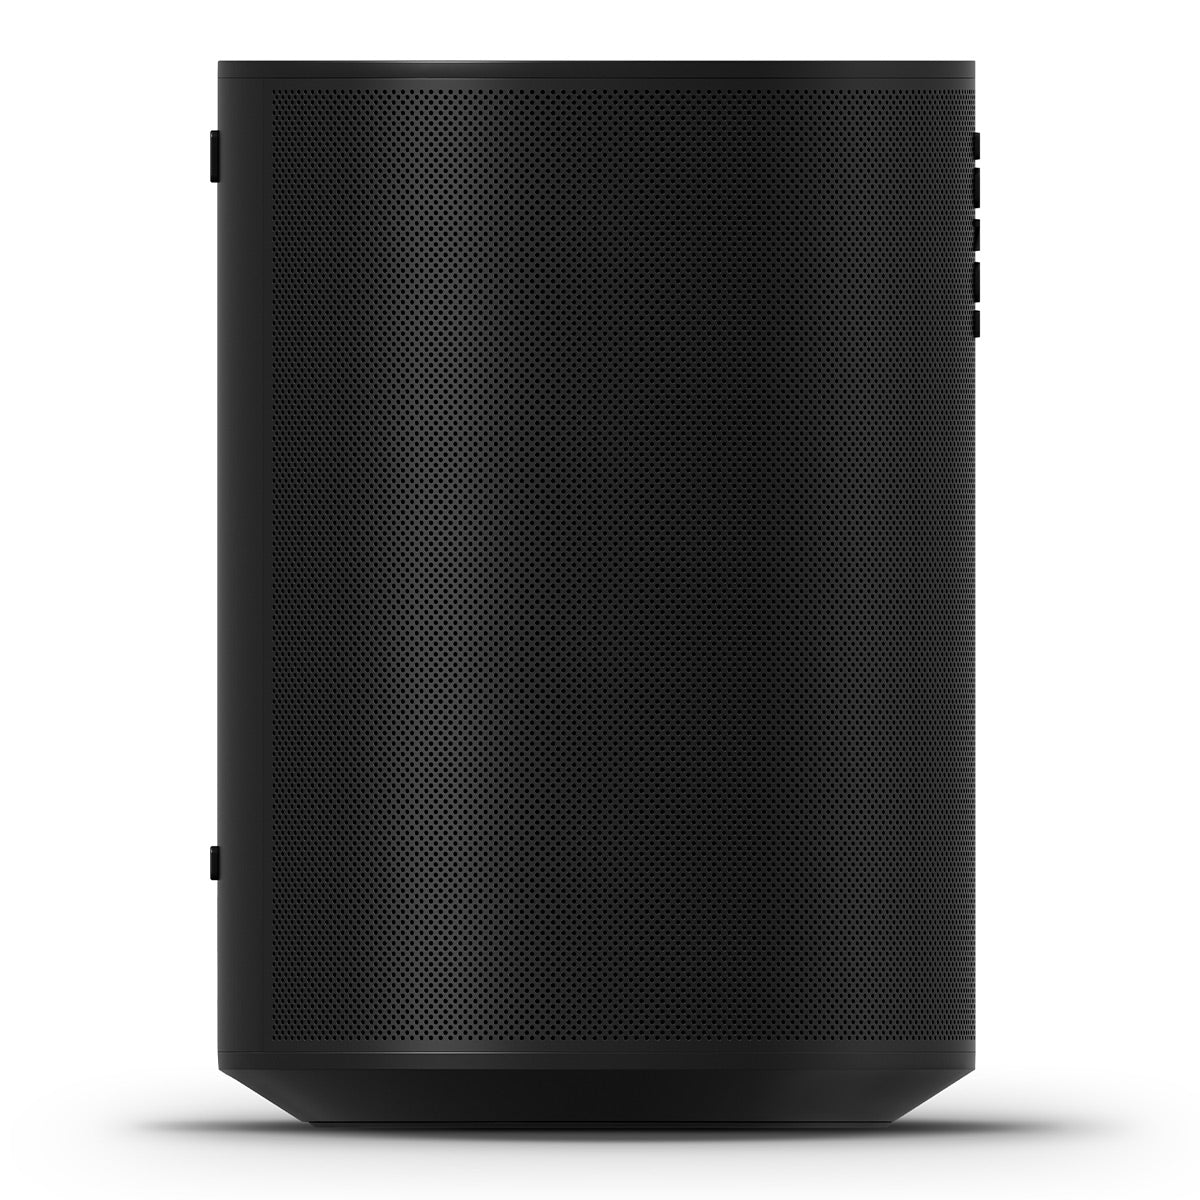 Sonos Era 100 Voice-Controlled (Black) Smart Acoustic Speaker Tuning Wireless Wide | Amazon with Trueplay Stereo Alexa Built-In Bluetooth, Technology, & World